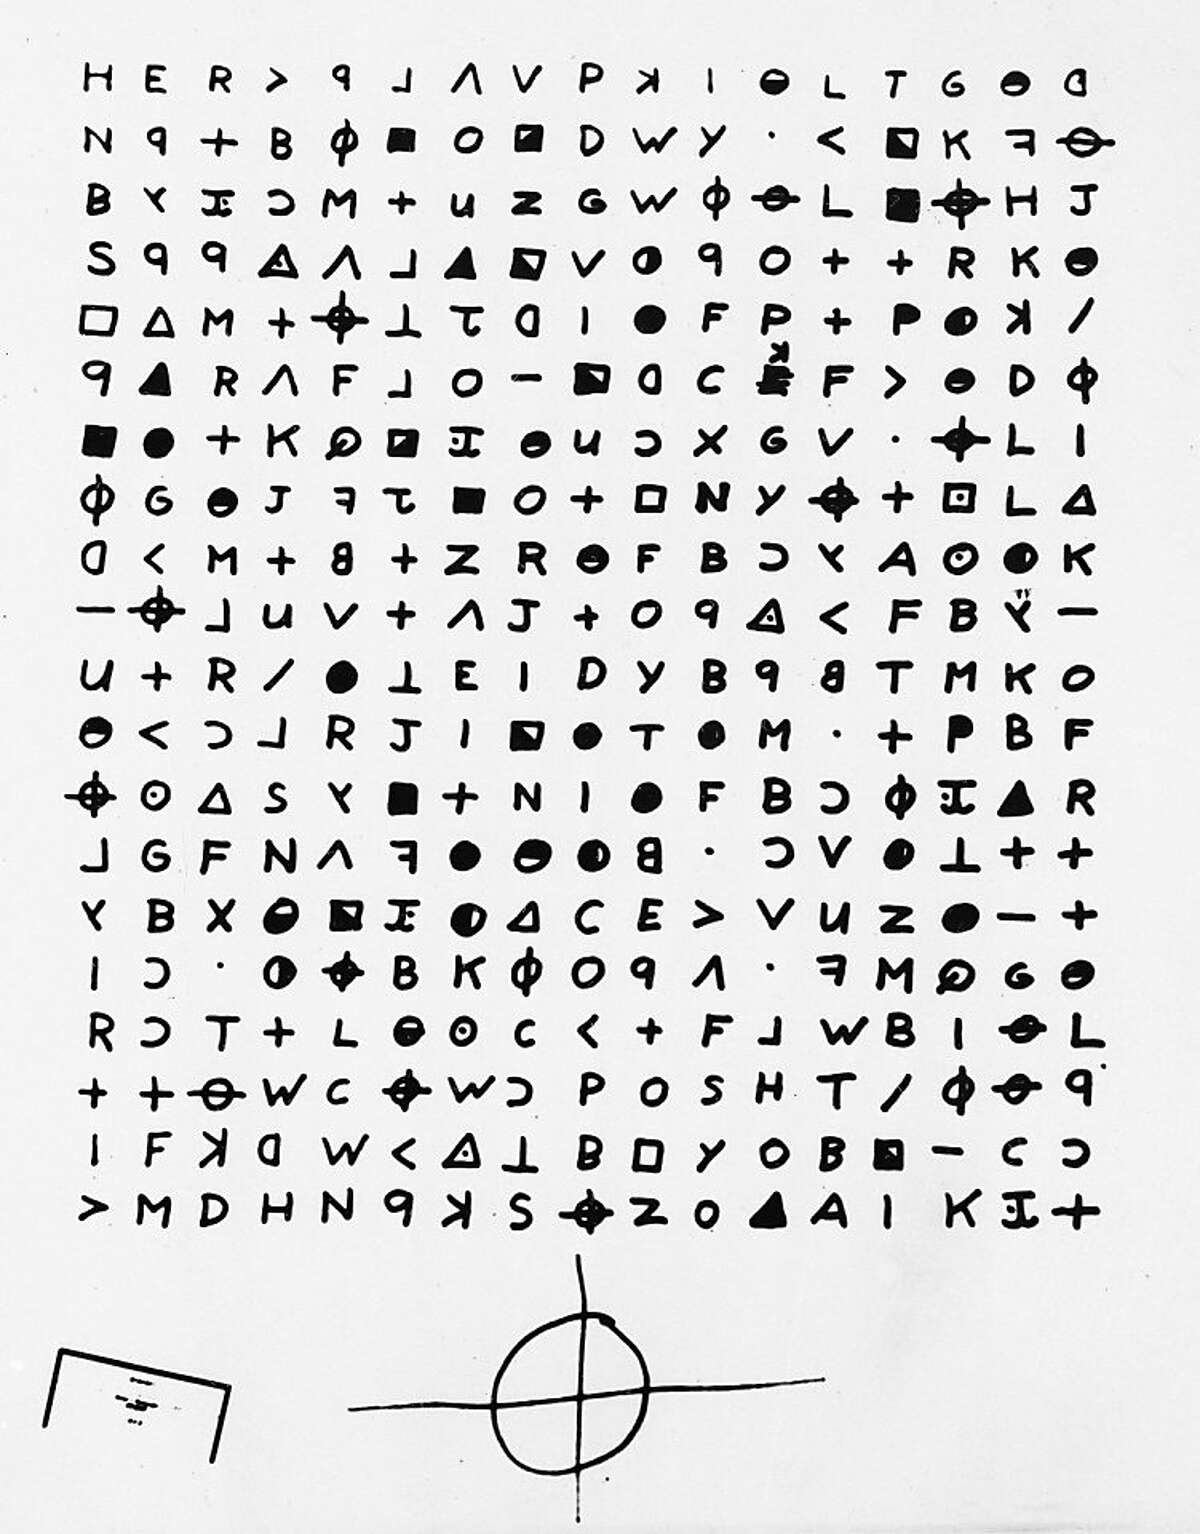 This is an undated copy of a cryptogram sent to the San Francisco Chronicle, Nov. 11, 1969 by the Zodiac Killer. The Zodiac killer is blamed for at least five murders in 1968 and 1969 in the San Francisco Bay Area. He was never caught,